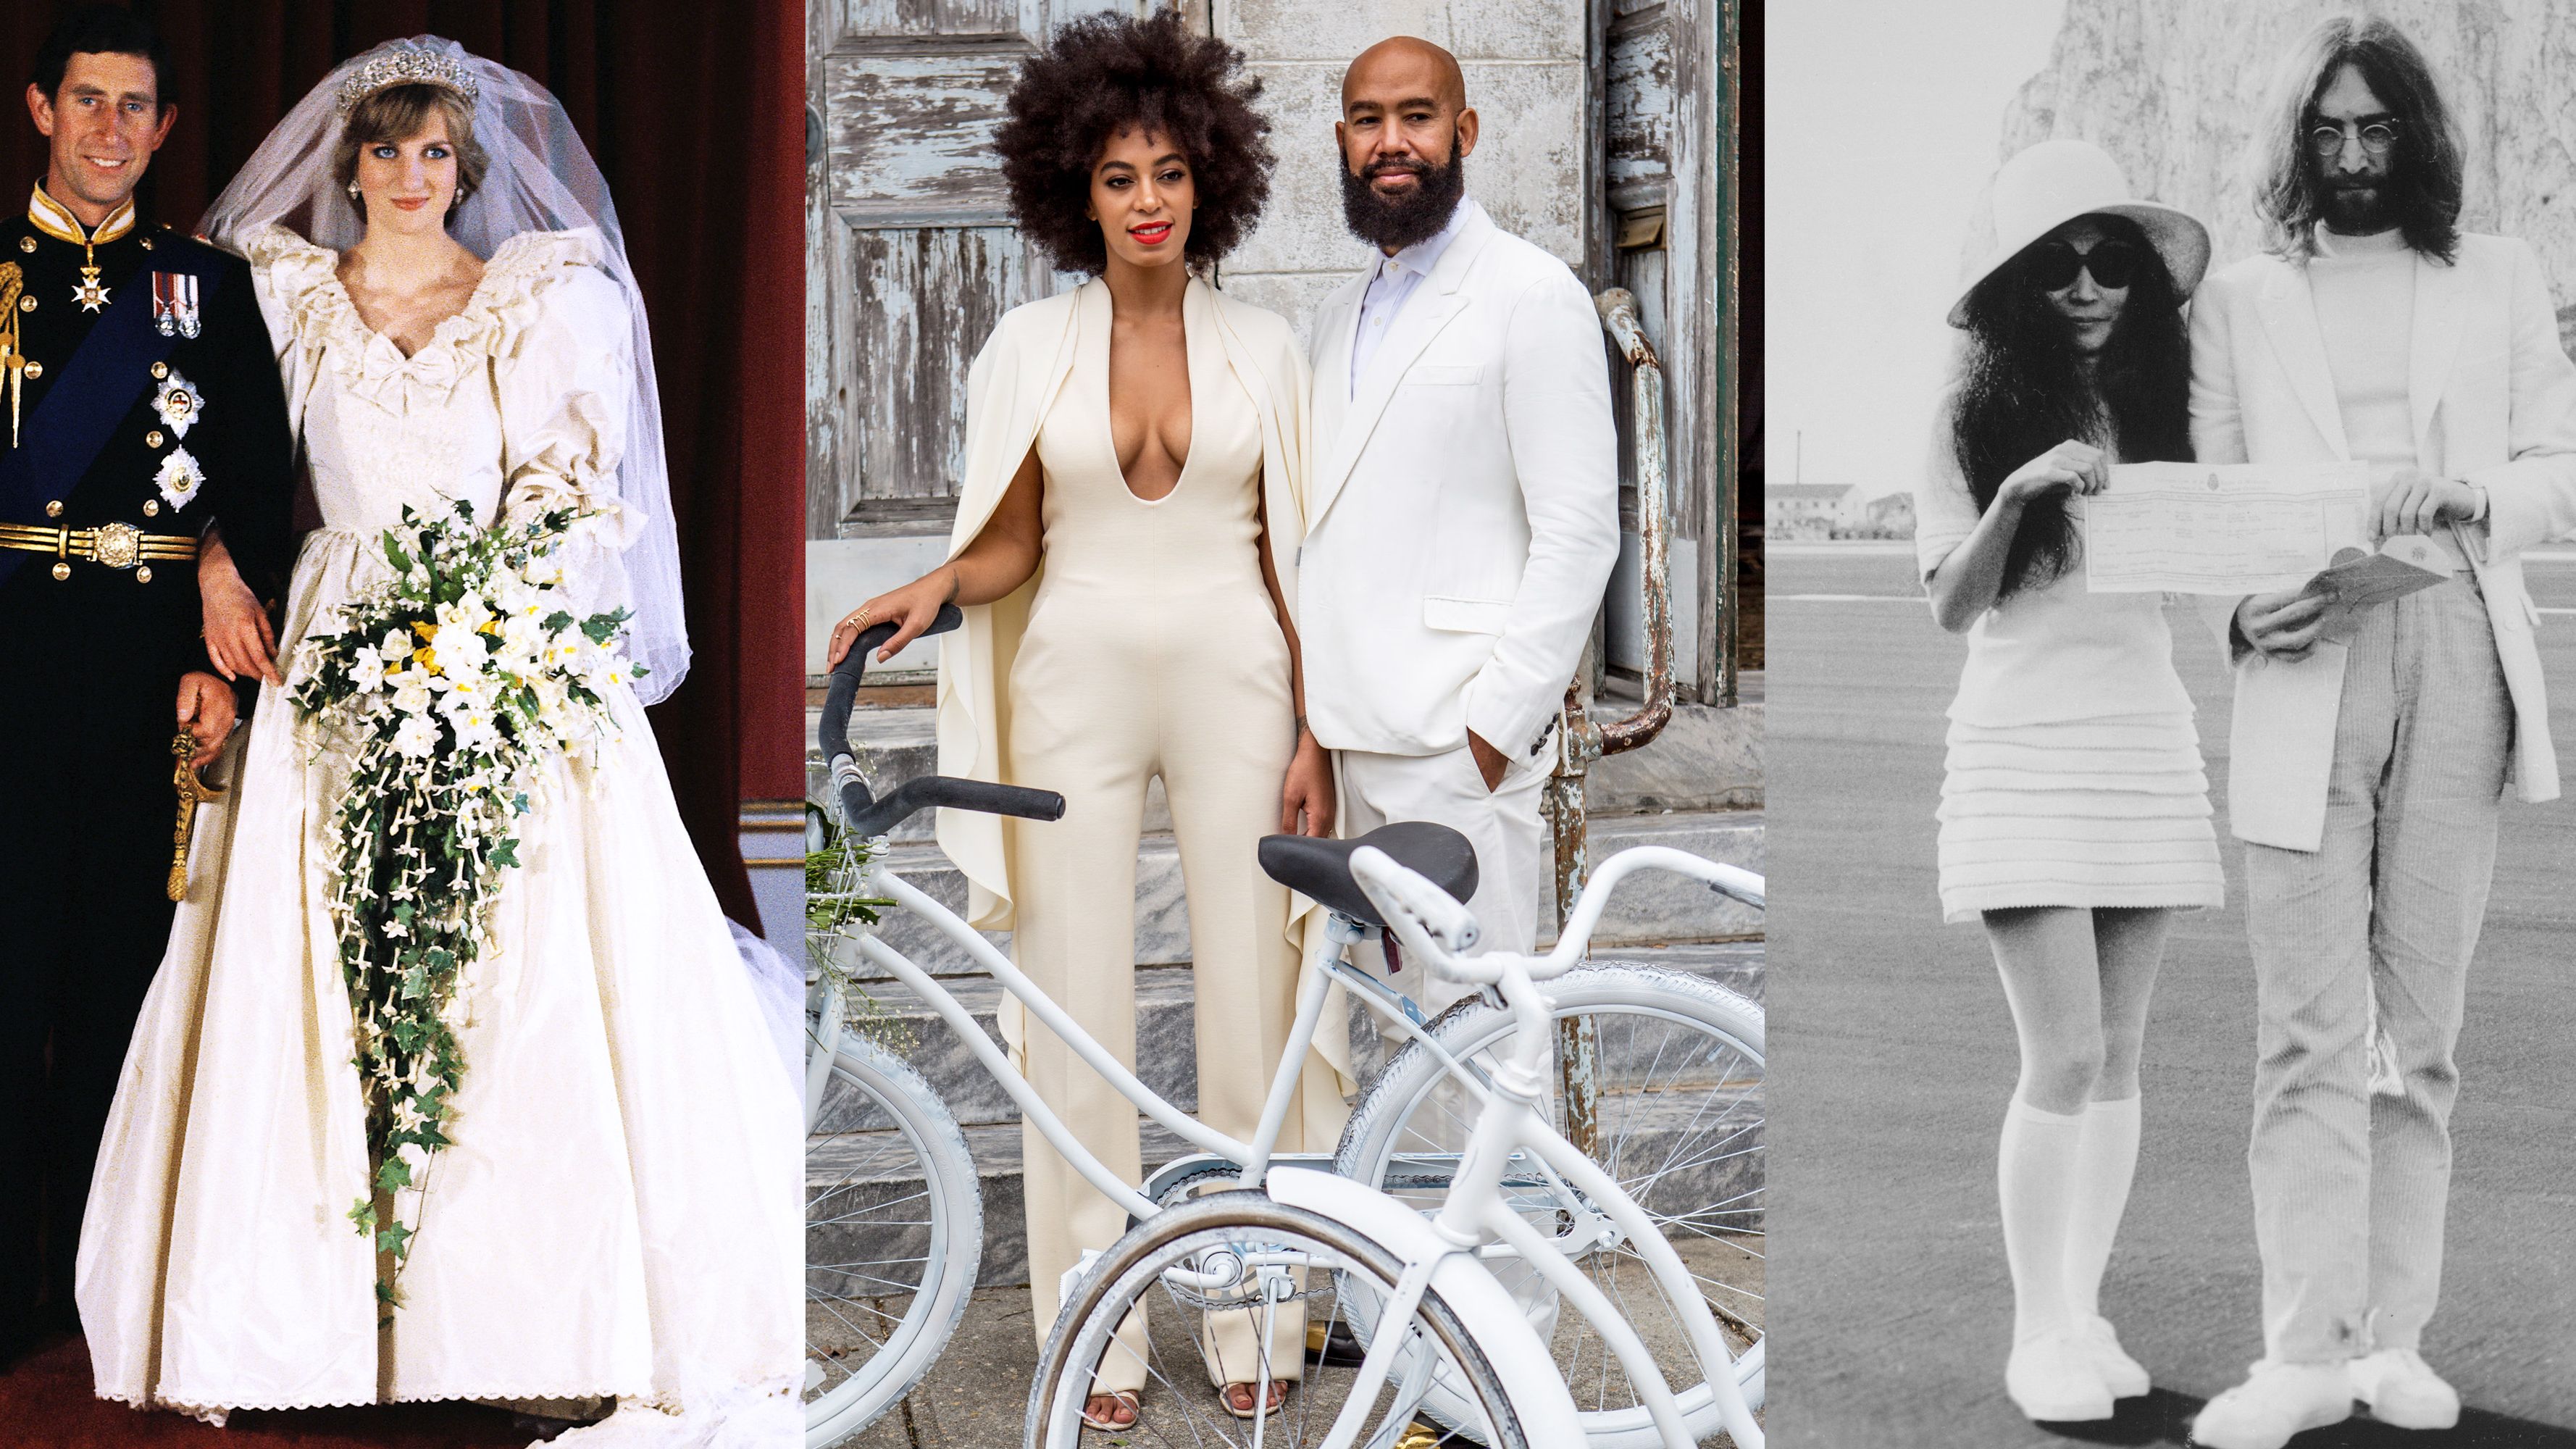 The Most Epic Weddings of 2018, from Secret Ceremonies to Royal